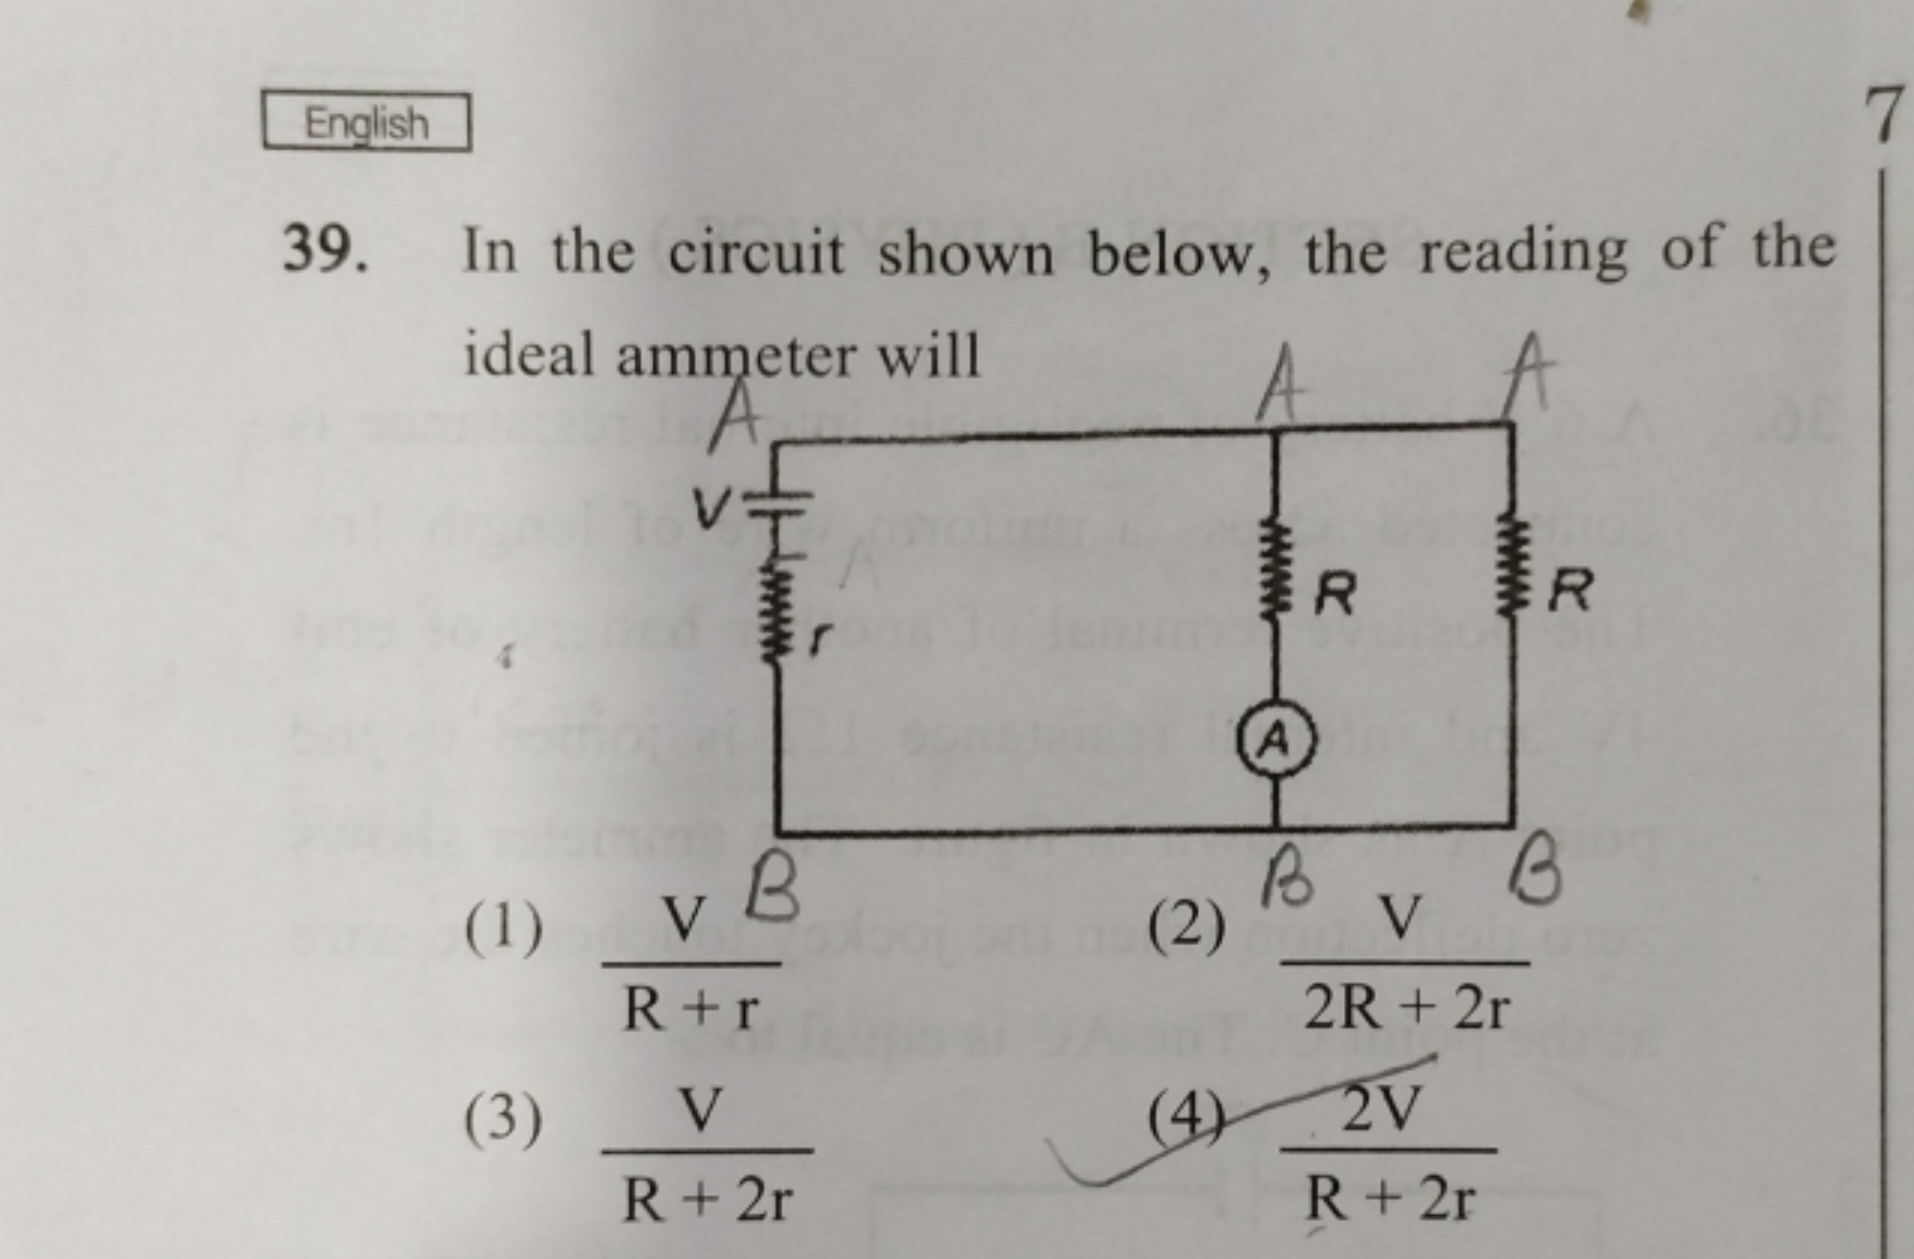 English 39. In the circuit shown below, the reading of the ideal ammet